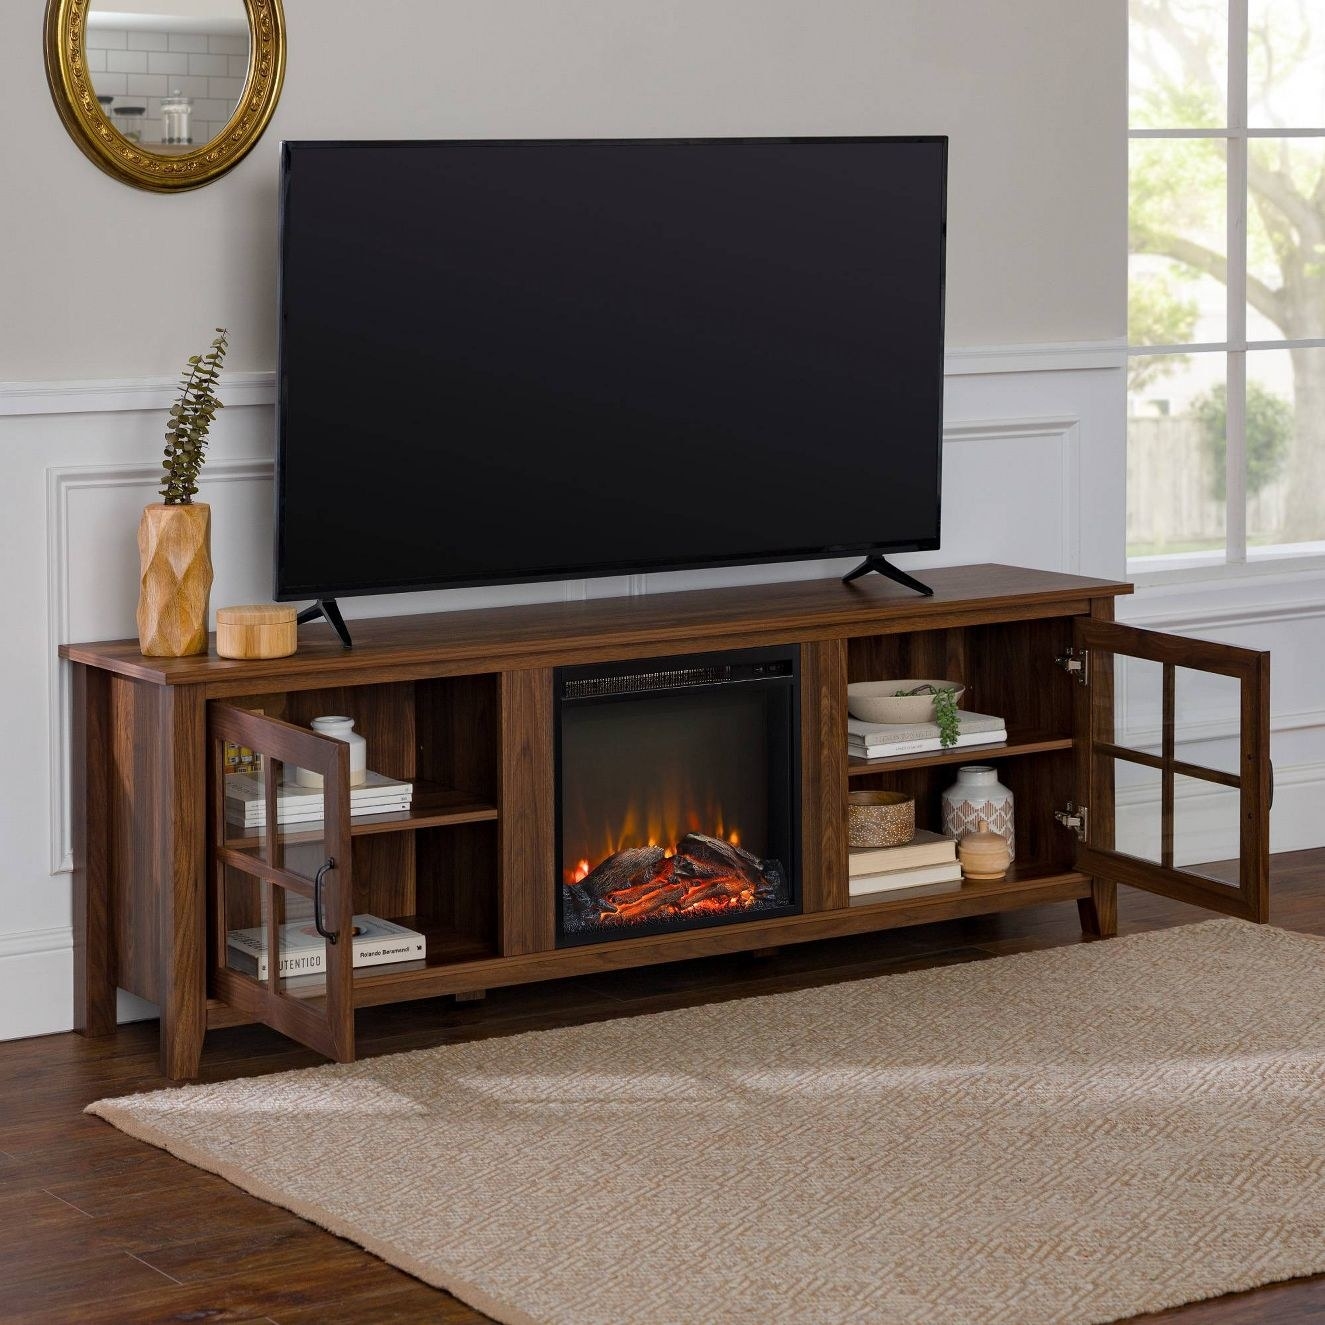 The fireplace TV stand in a room